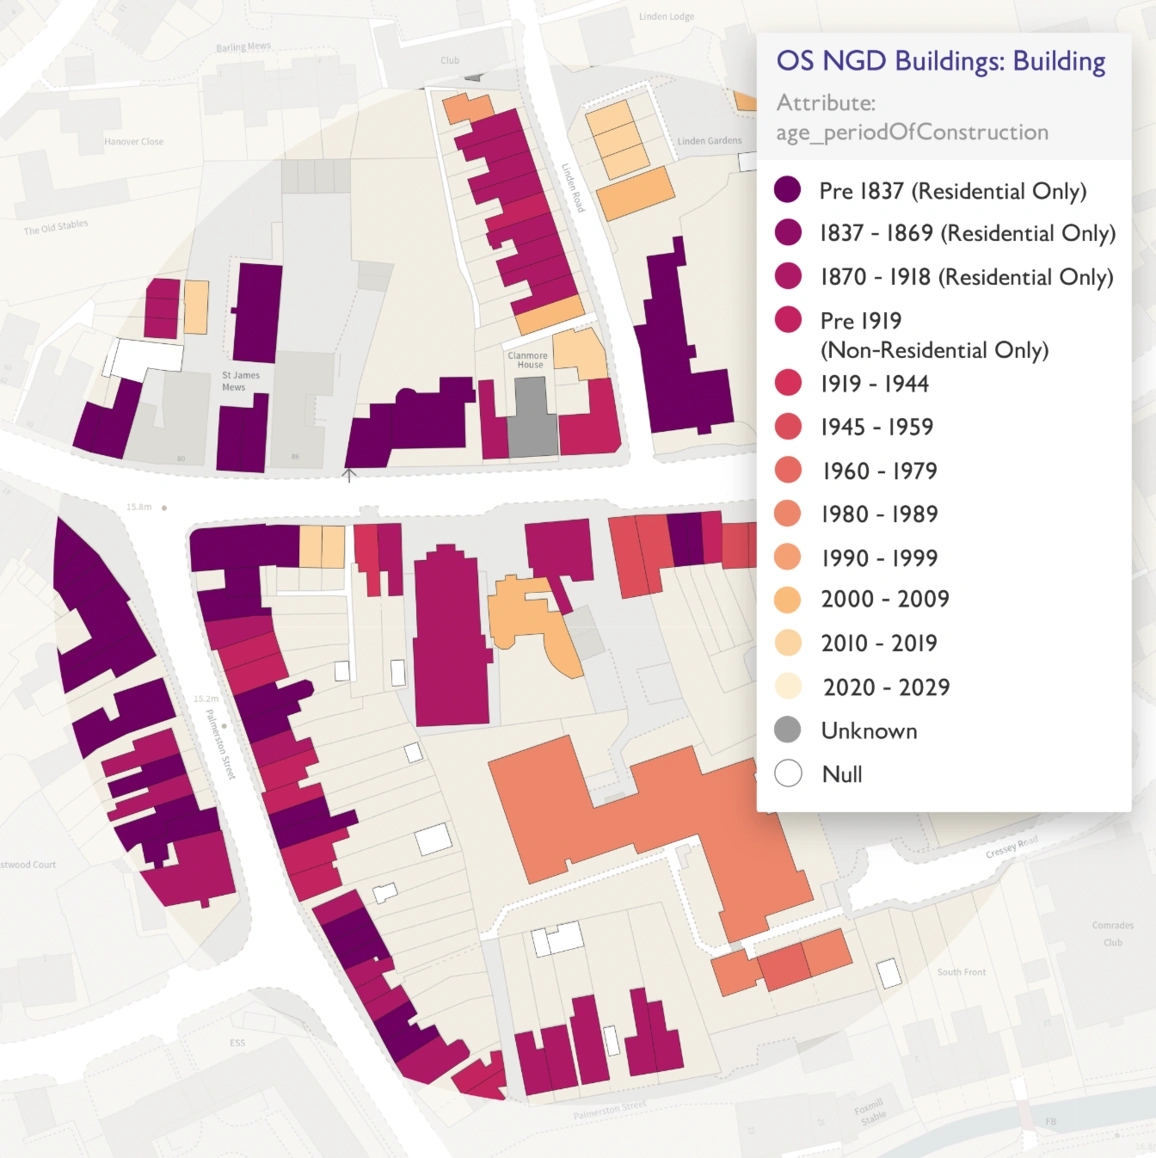 Building age shown on OS map